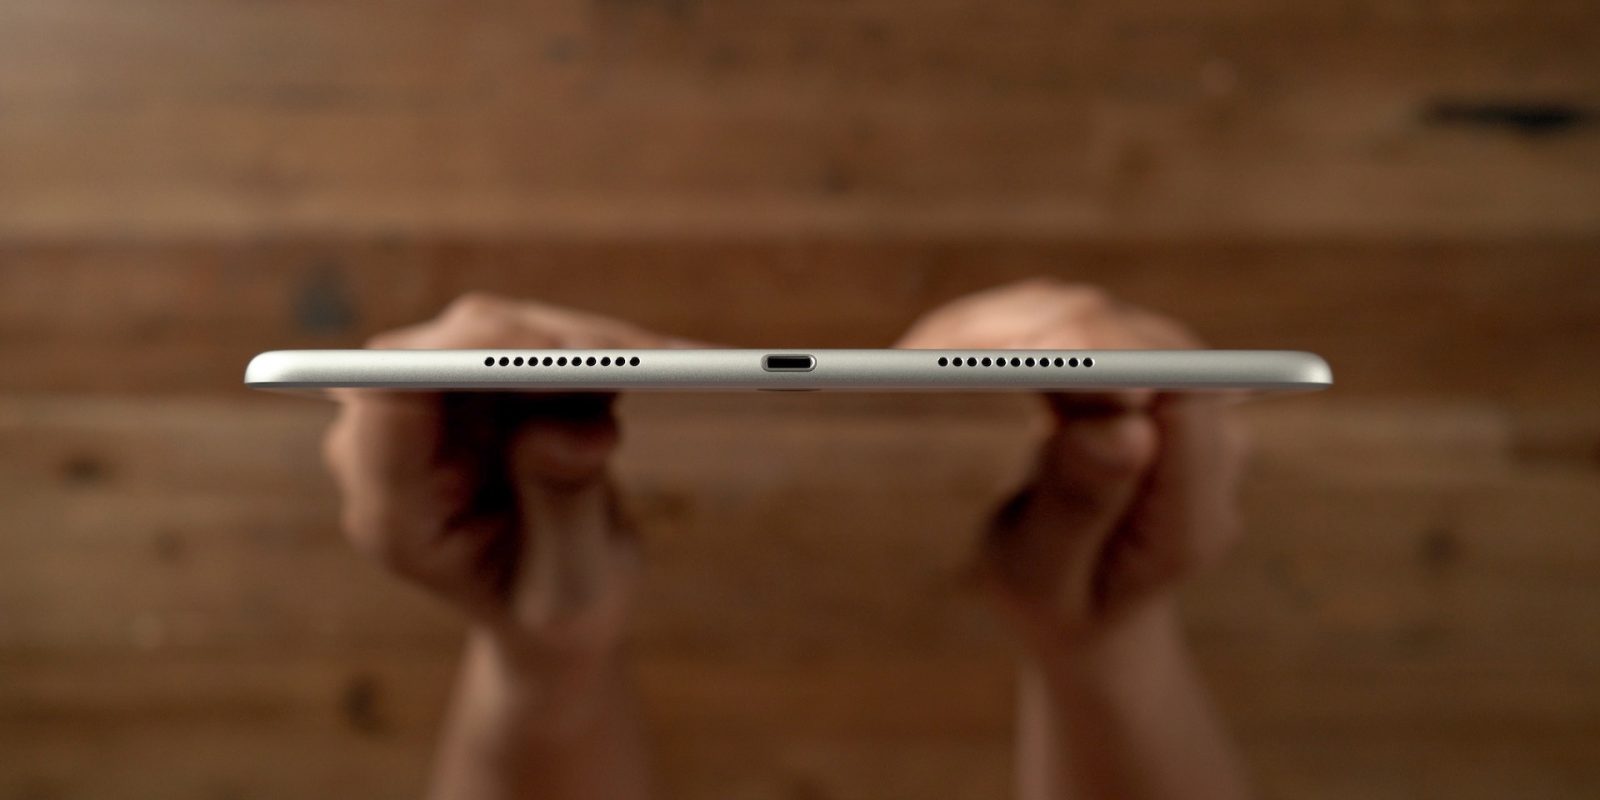 Report: Fourth-generation iPad Air to switch to USB-C, iPad mini sticking  with Lightning - 9to5Mac